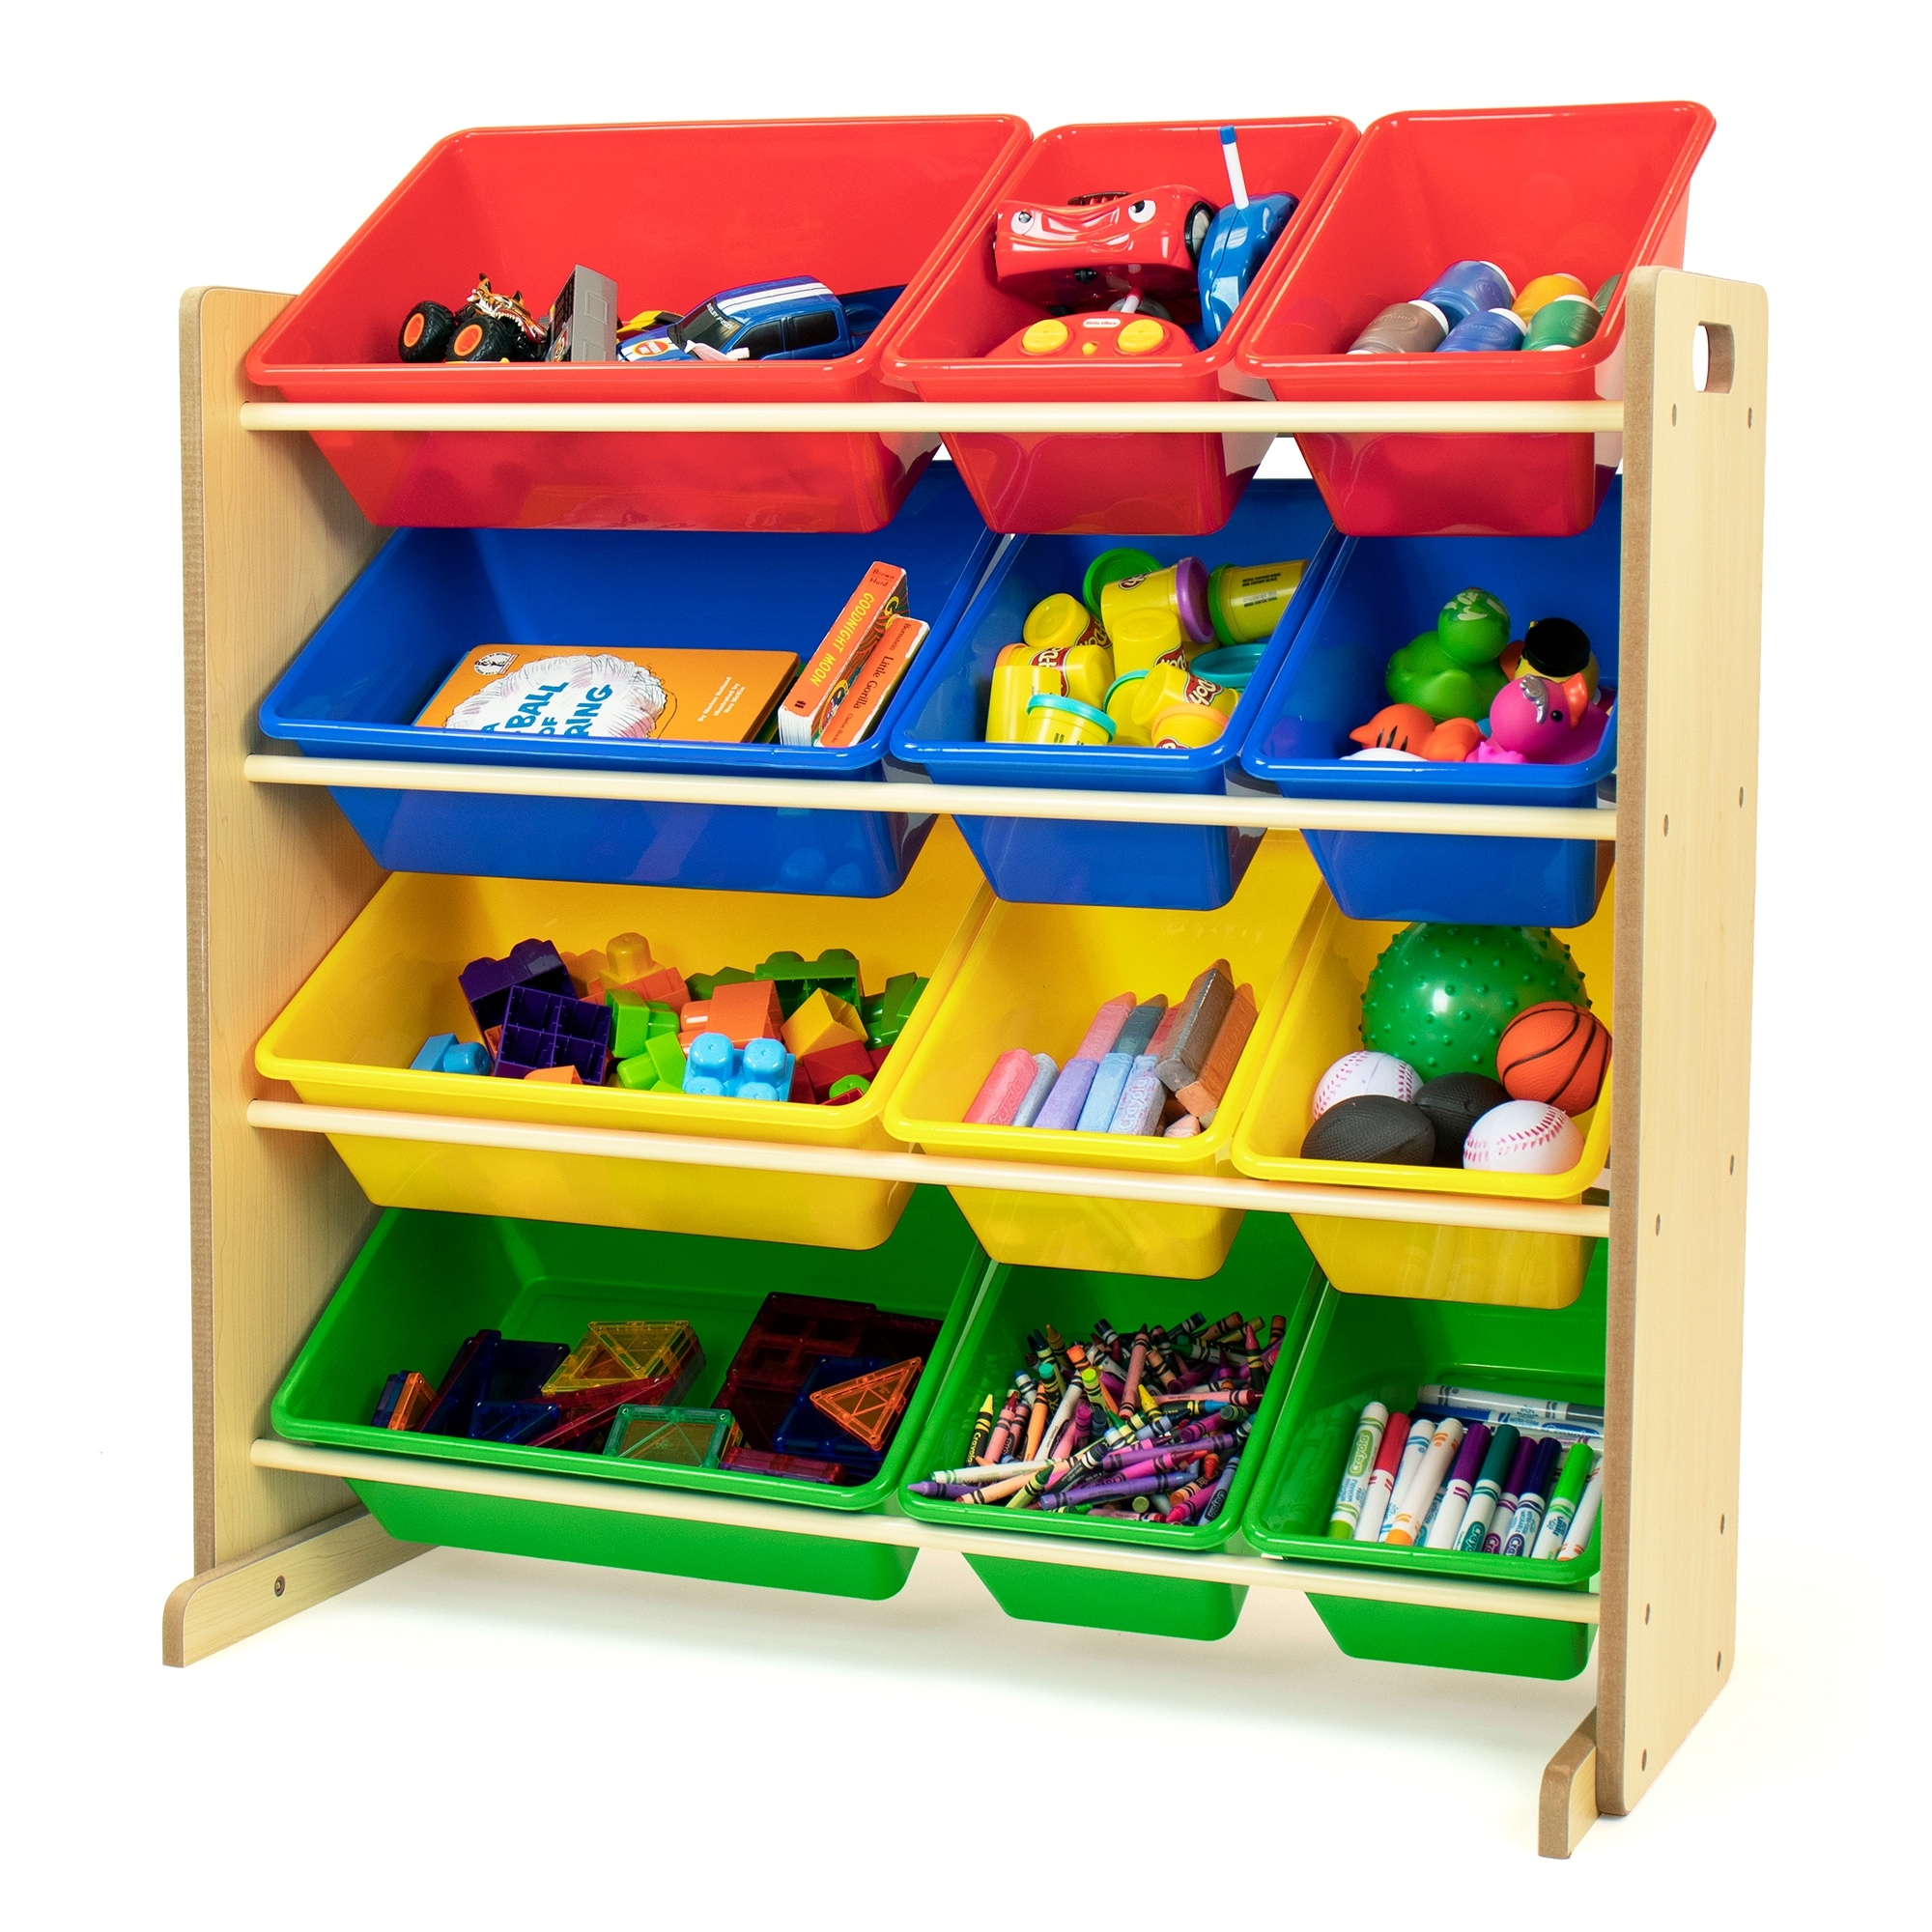 https://ak1.ostkcdn.com/images/products/is/images/direct/a3bbd637d4a4c8e3116bdc6e140f99e611156bdd/Tot-Tutors-Kids-Toy-Storage-Organizer-with-12-Plastic-Bins%2C-Natural-Frame-%26-Primary-Bins.jpg